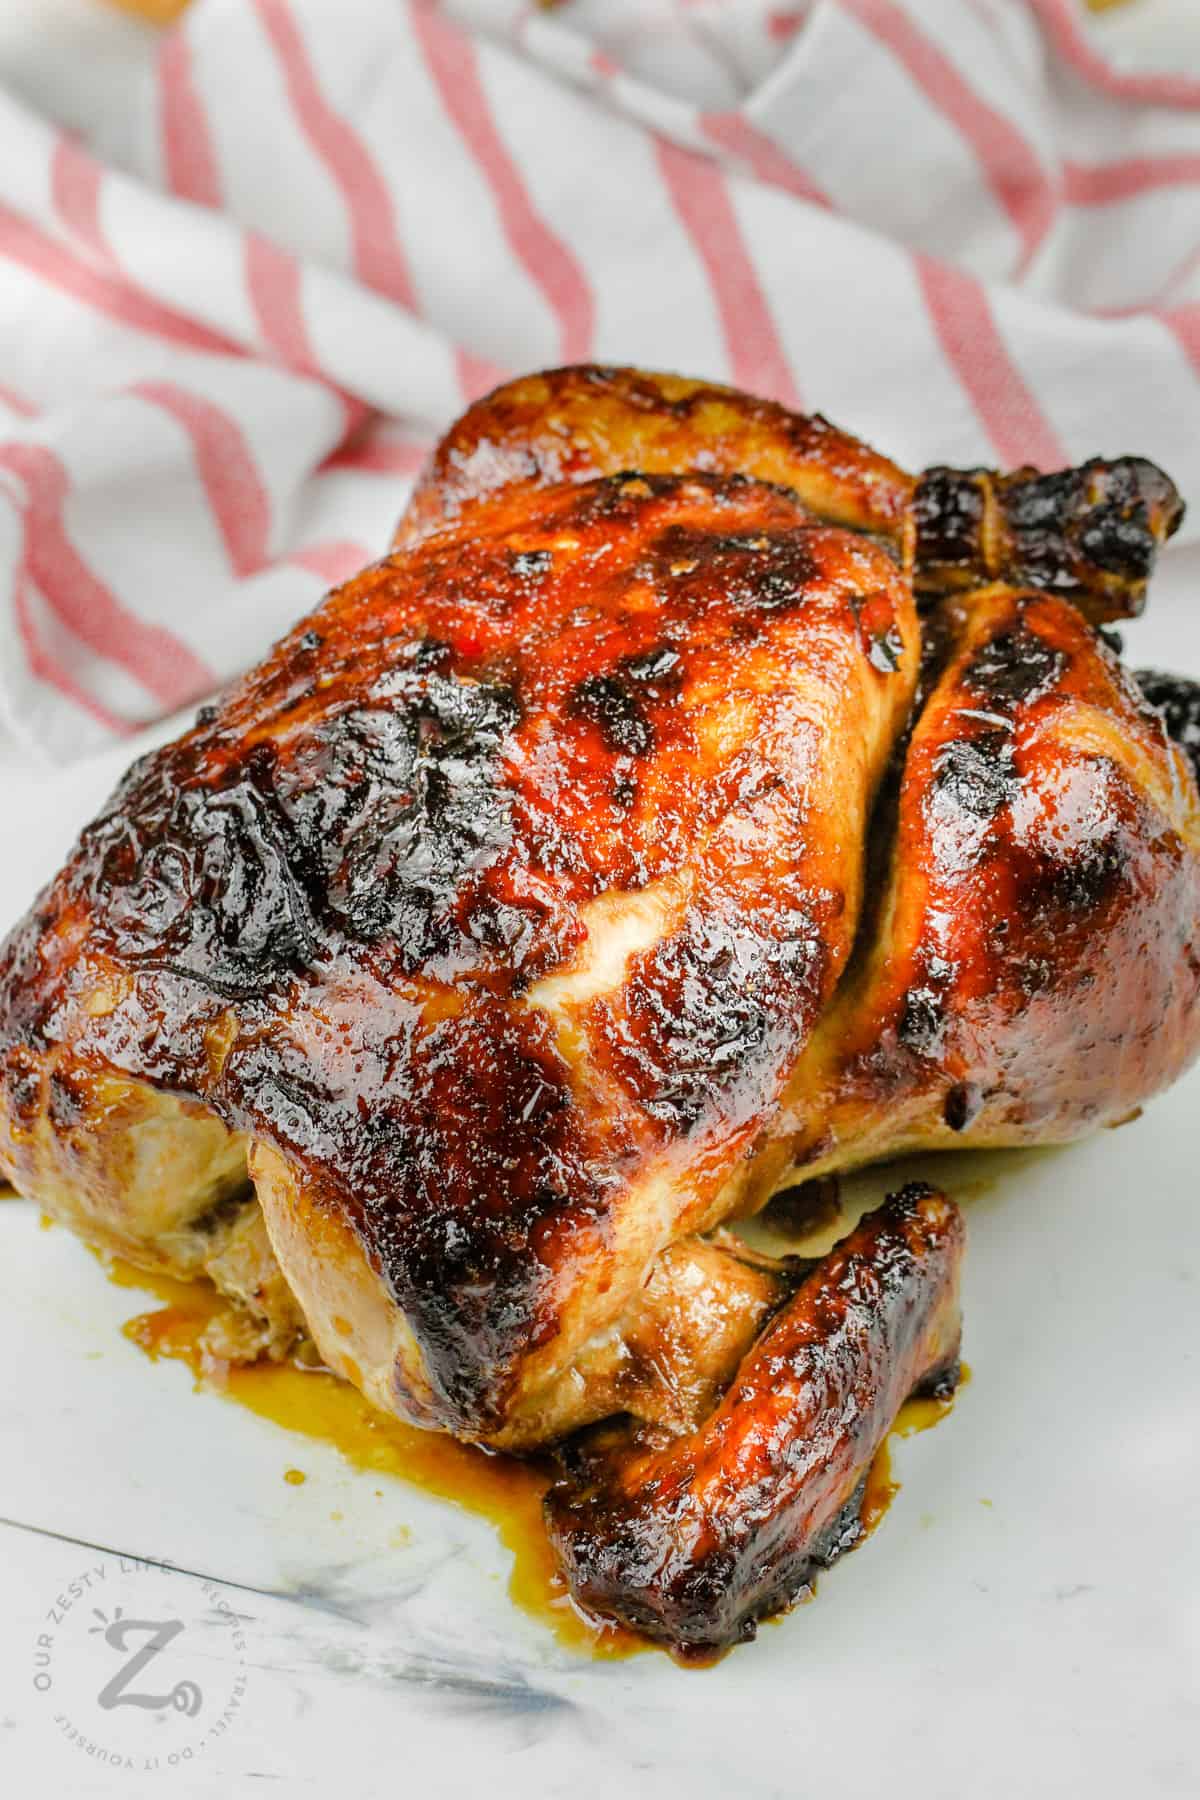 Sweet Chili Roasted Chicken after being roasted